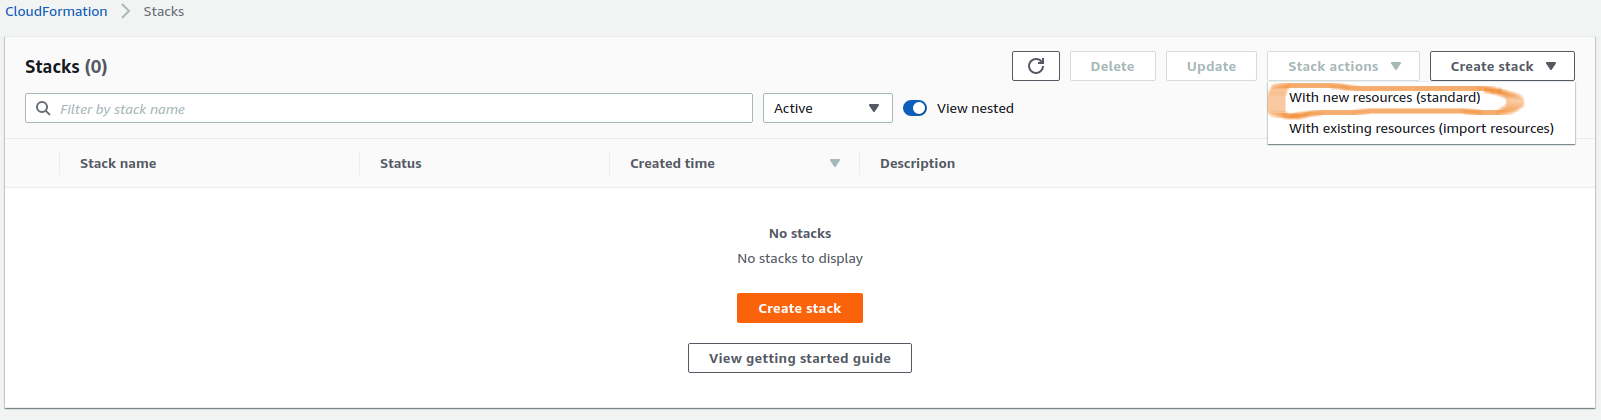 Screenshot of AWS Console showing CloudFormation panel, with Create Stack button centered